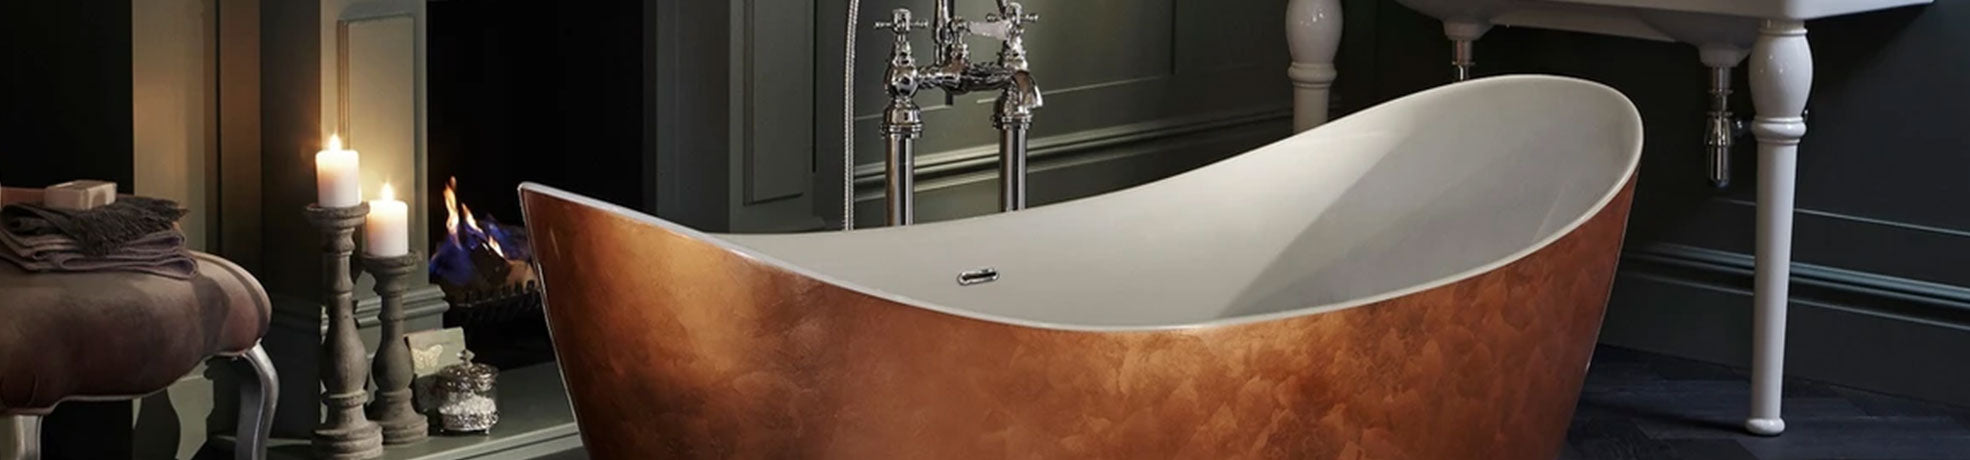 Heritage Derrymore 1745mm Roll Top Freestanding Double-Ended Bath Acry